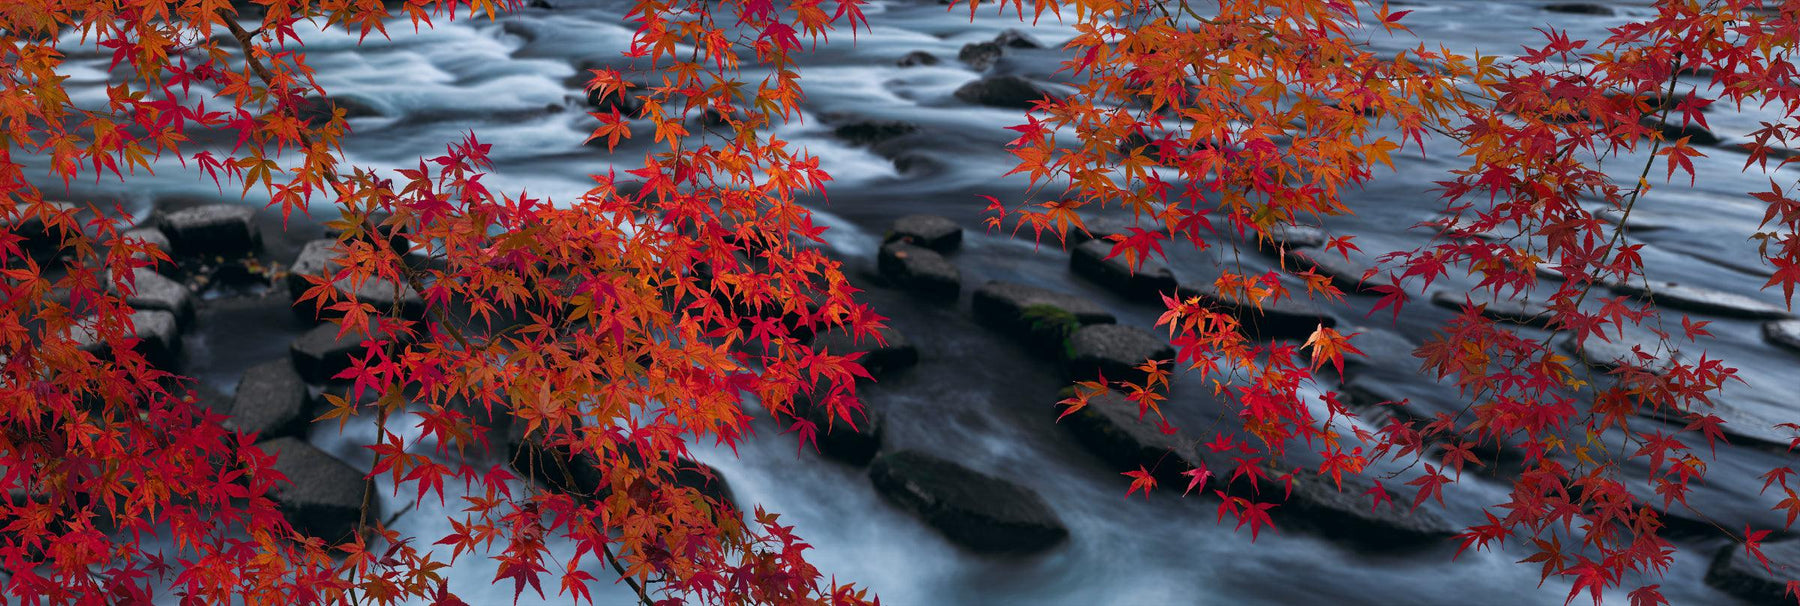 Branches covered in red maple leaves reaching over a black rocky river in Japan